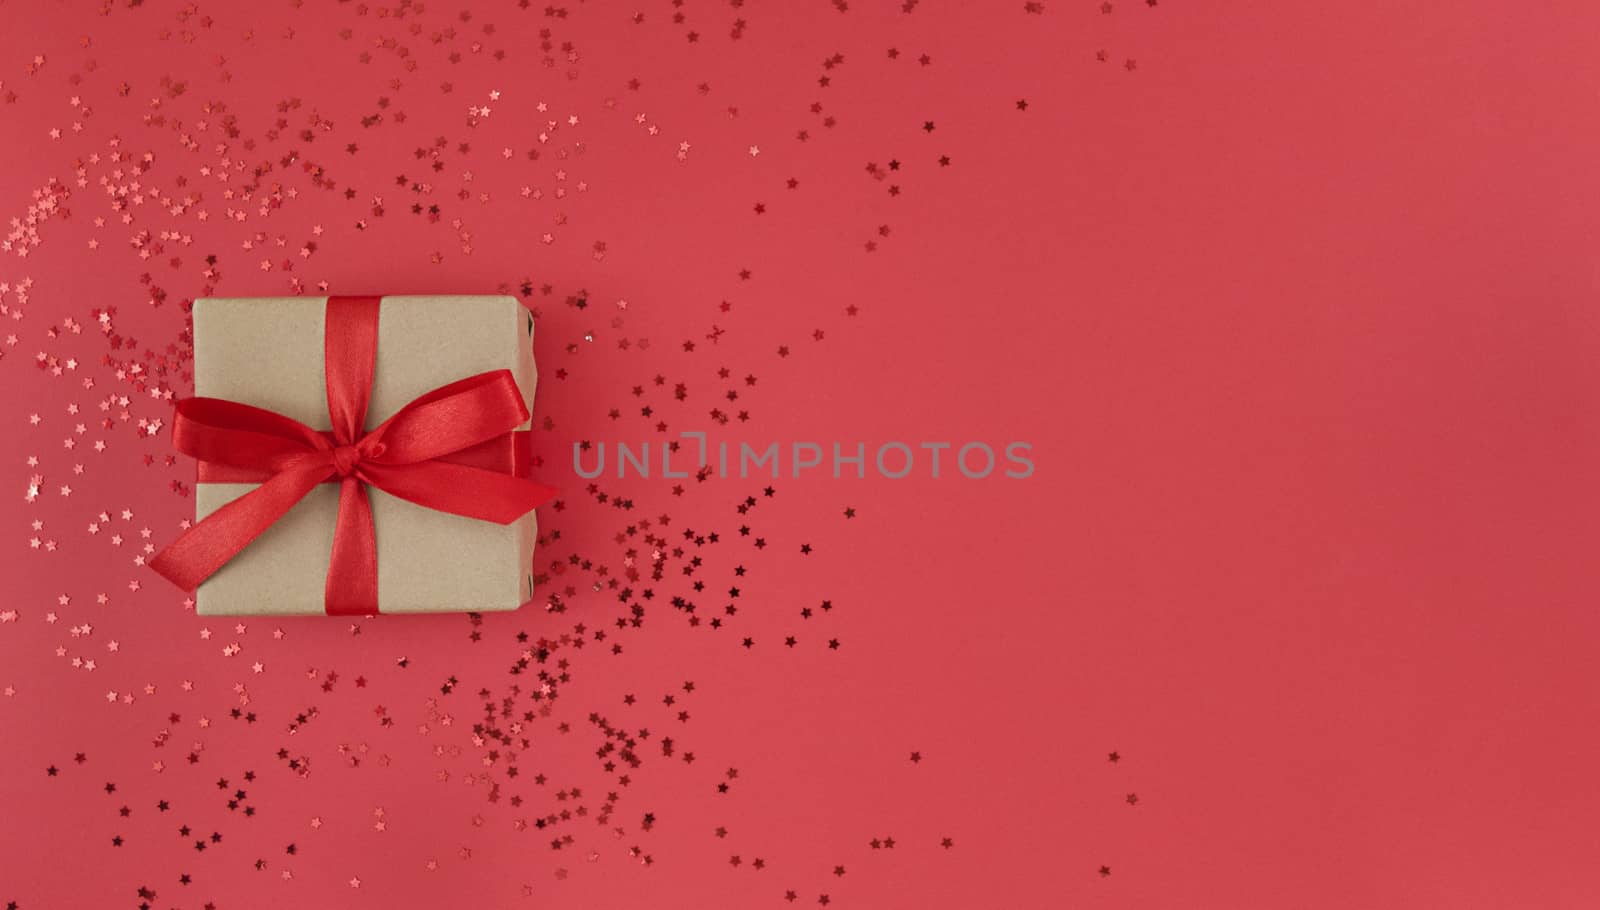 Gift box wrapped in craft paper with red ribbon with bow and confetti on red background. Monochrome festive flat lay with copy space.